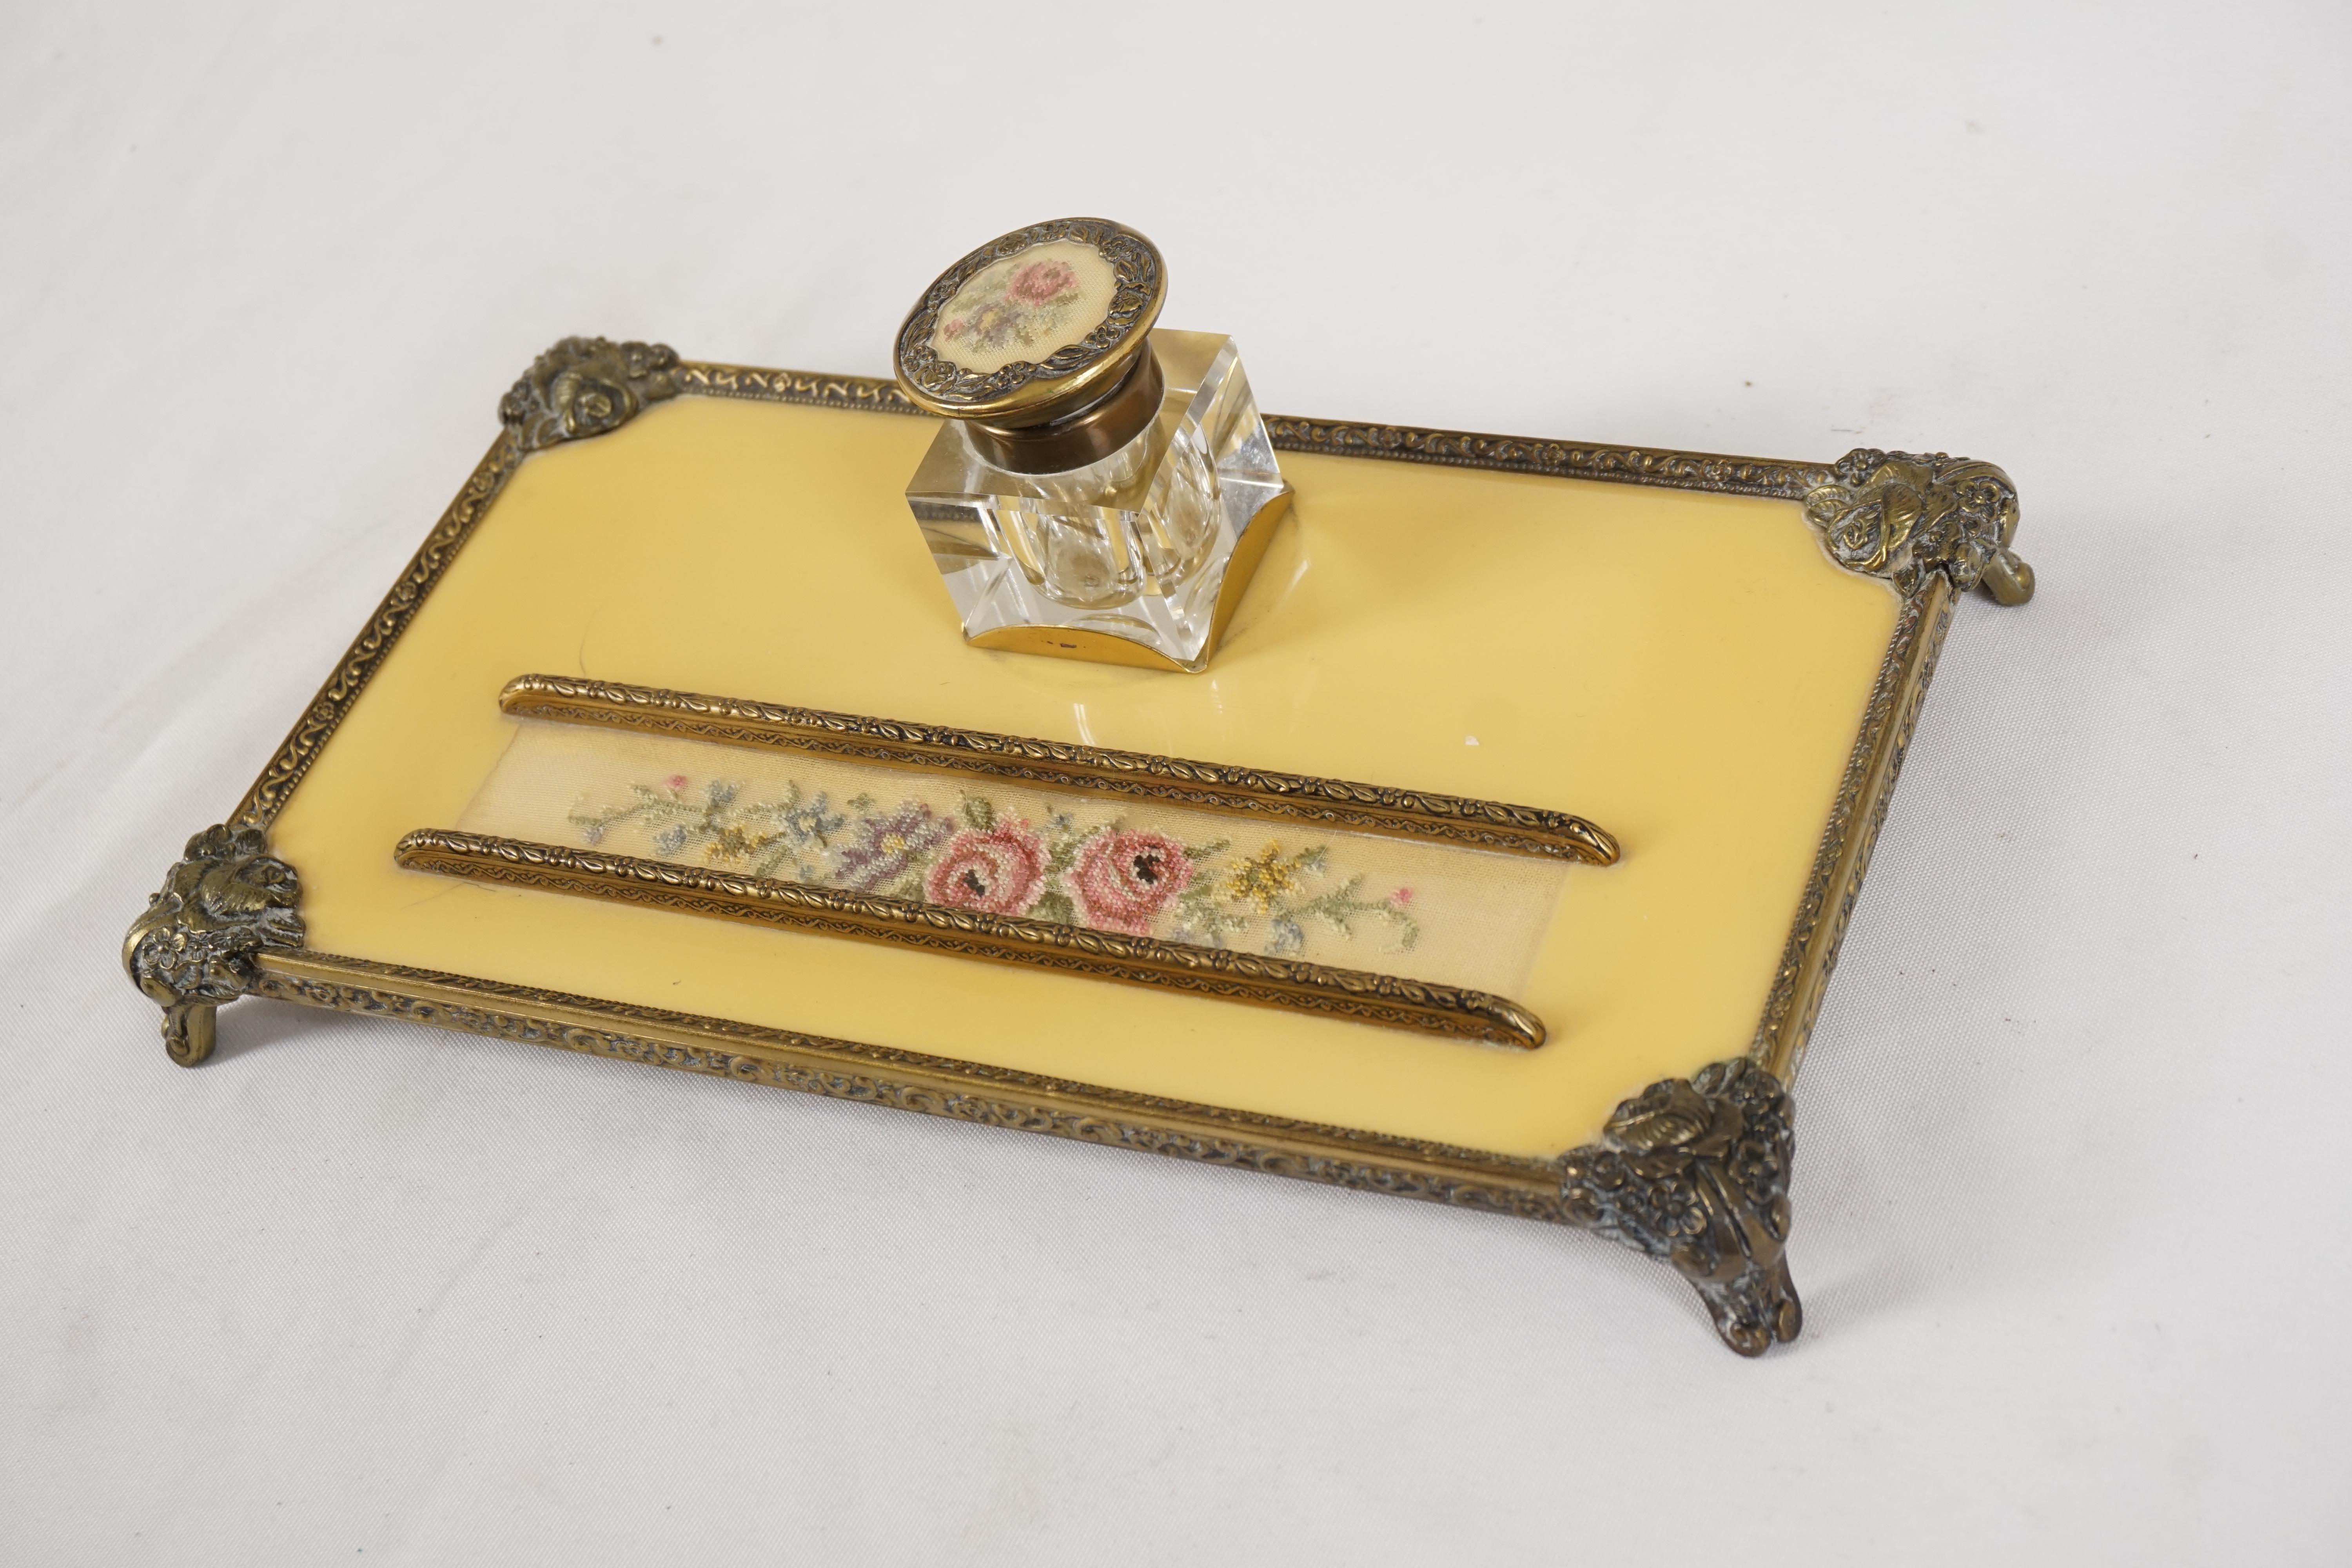 Antique brass inkstand, rectangular base, Scotland 1930, H559

Scotland 1930
Brass + Glass
Rectangular base with a square crystal inkwell with brass lid 
Pen holder to the front 
Decorated with floral embroidery 
All raised on four carved feet